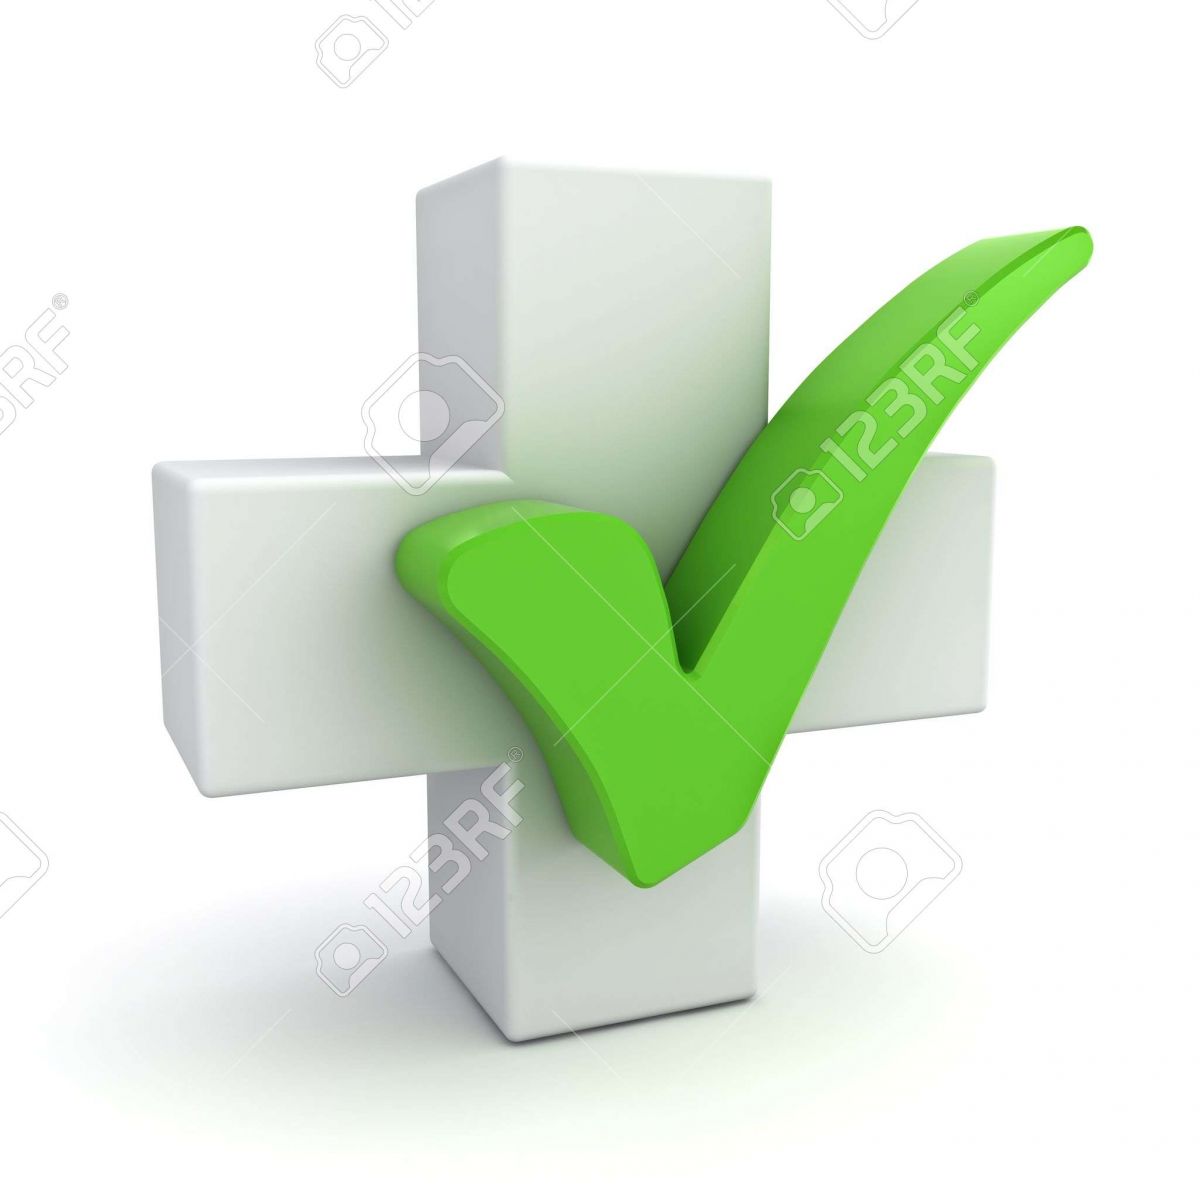 21579277-White-plus-sign-with-green-check-mark-concept-isolated-on-white--Stock-Photo.jpg (60 KB)